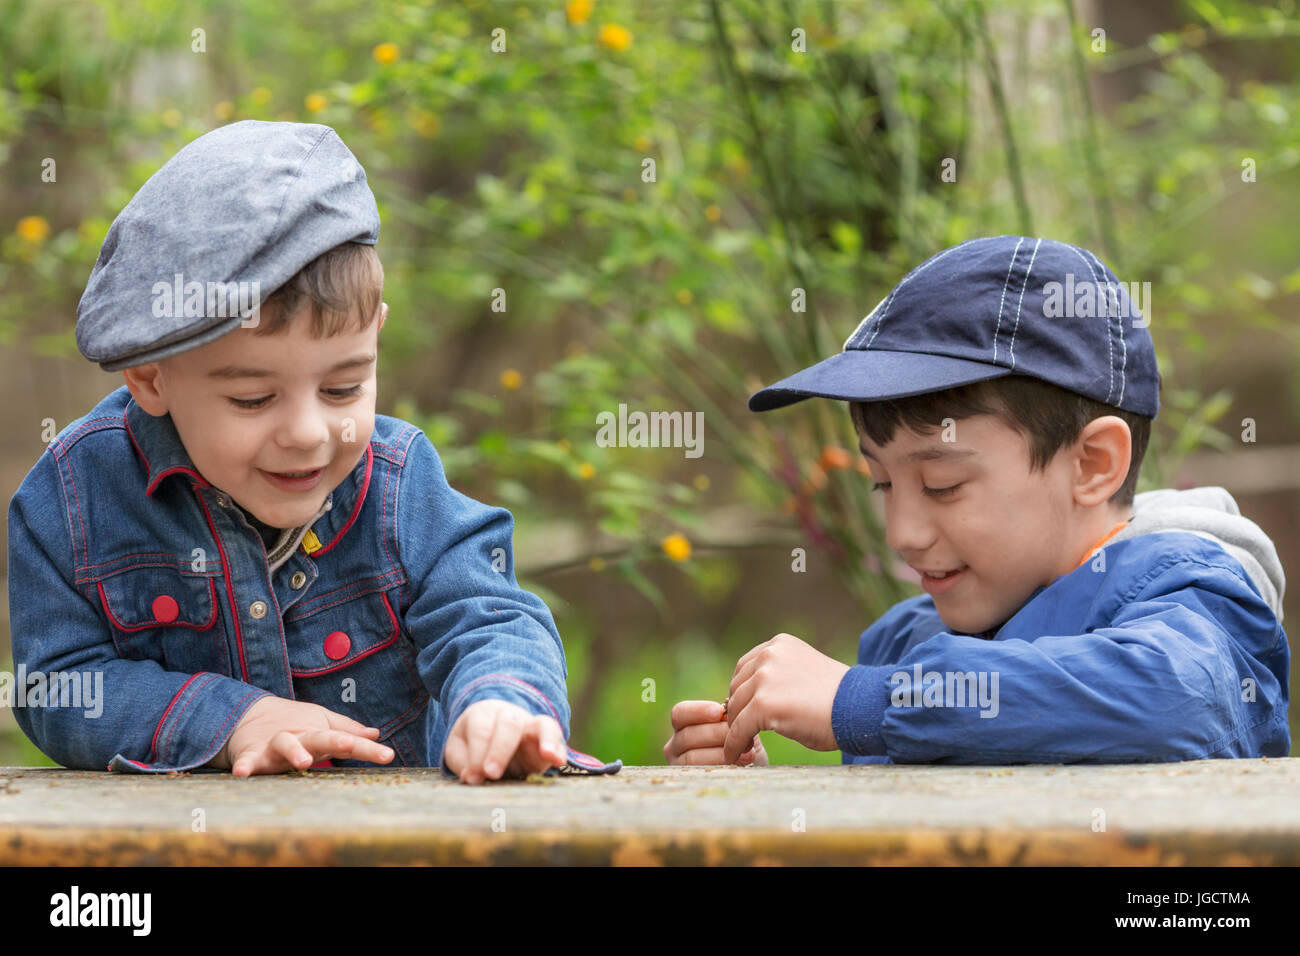 Two boys playing outdoors Stock Photo